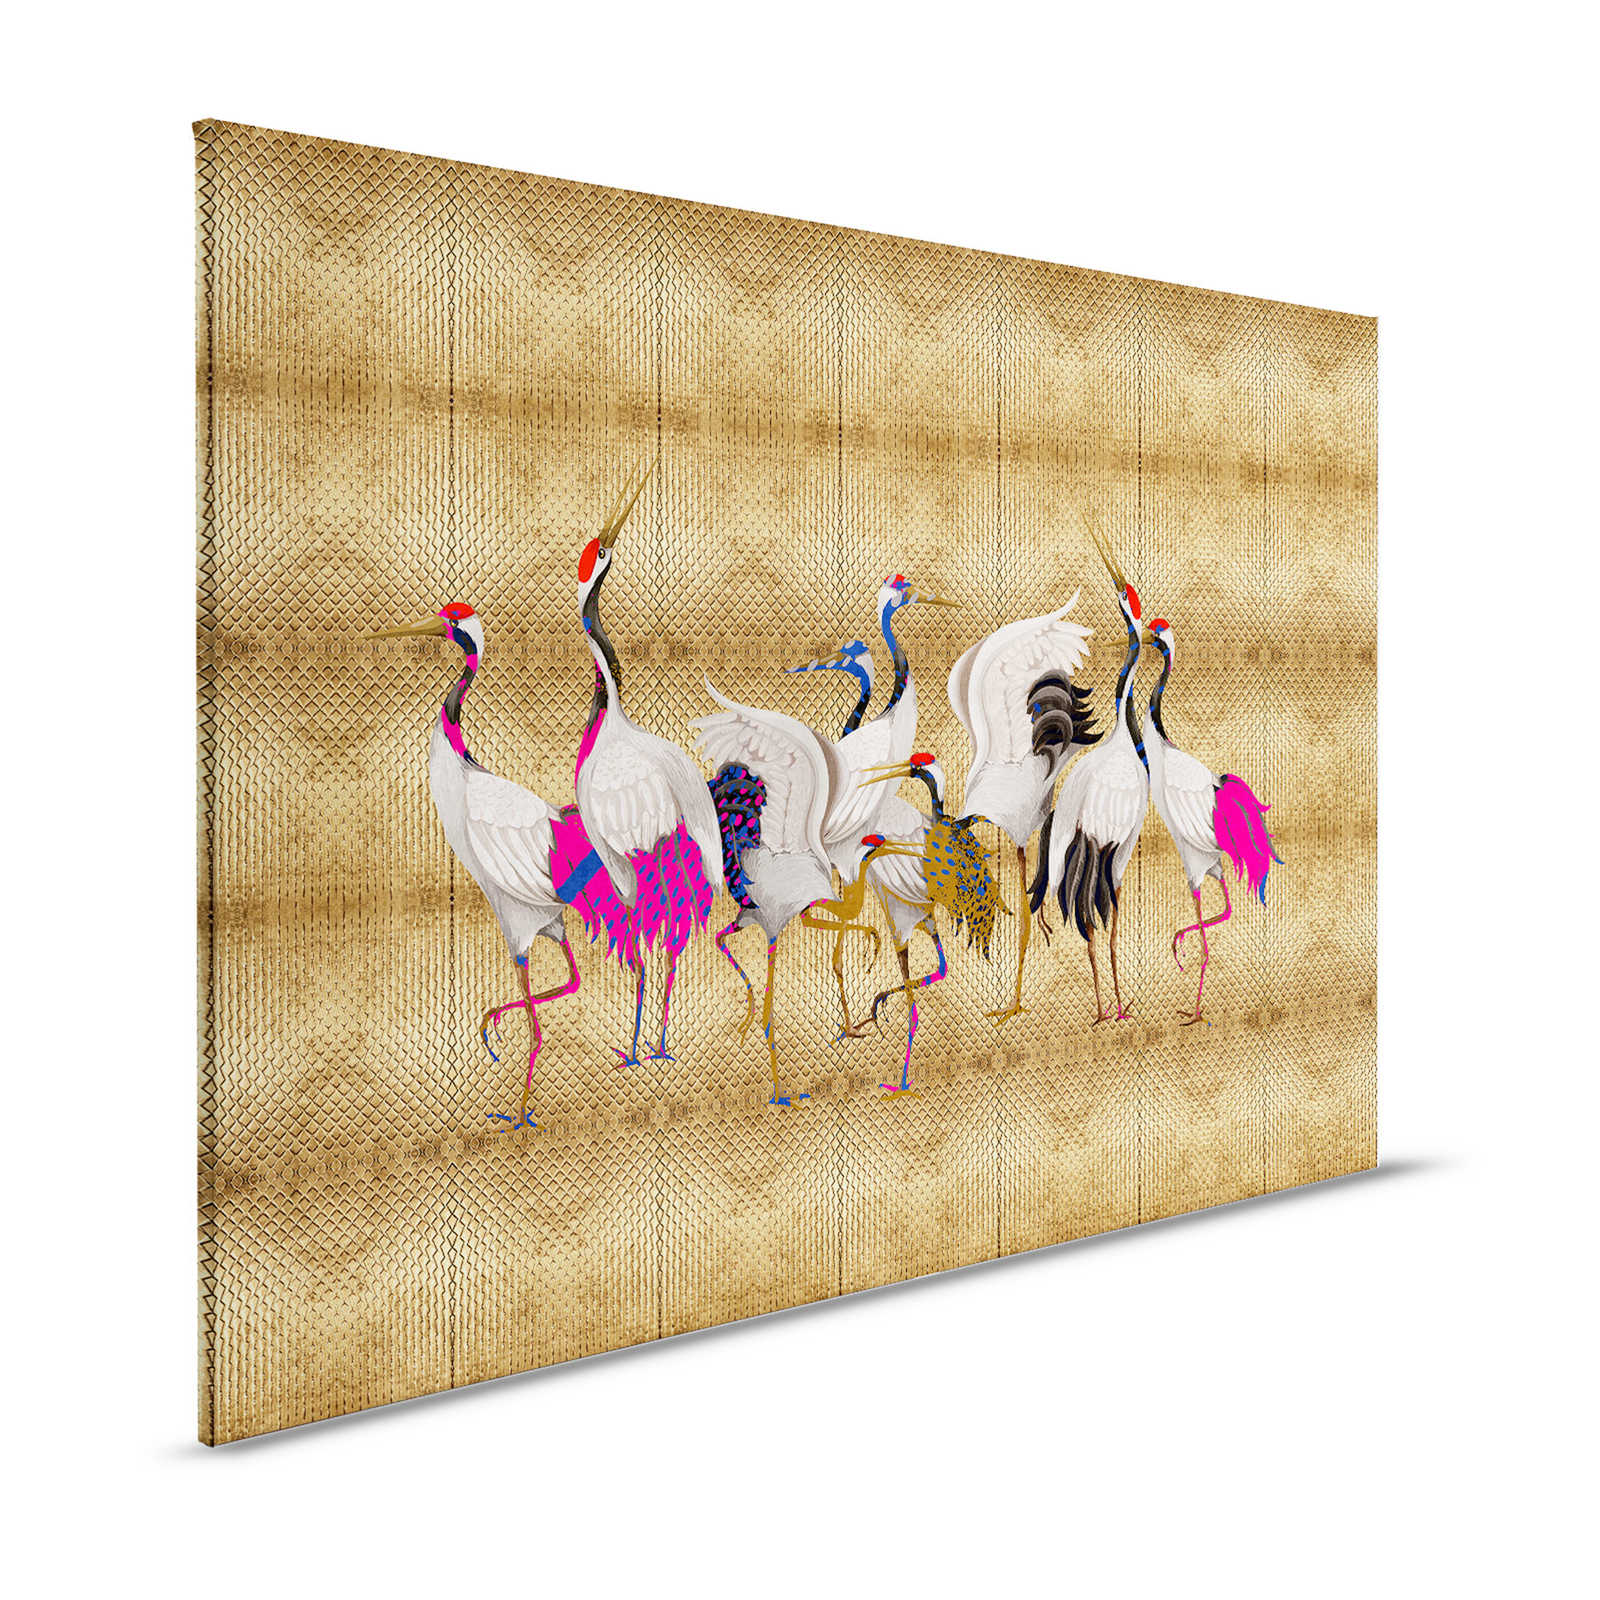 Land of Happiness 1 - Metallic Canvas Painting Gold with Colourful Crane Motif - 1.20 m x 0.80 m
